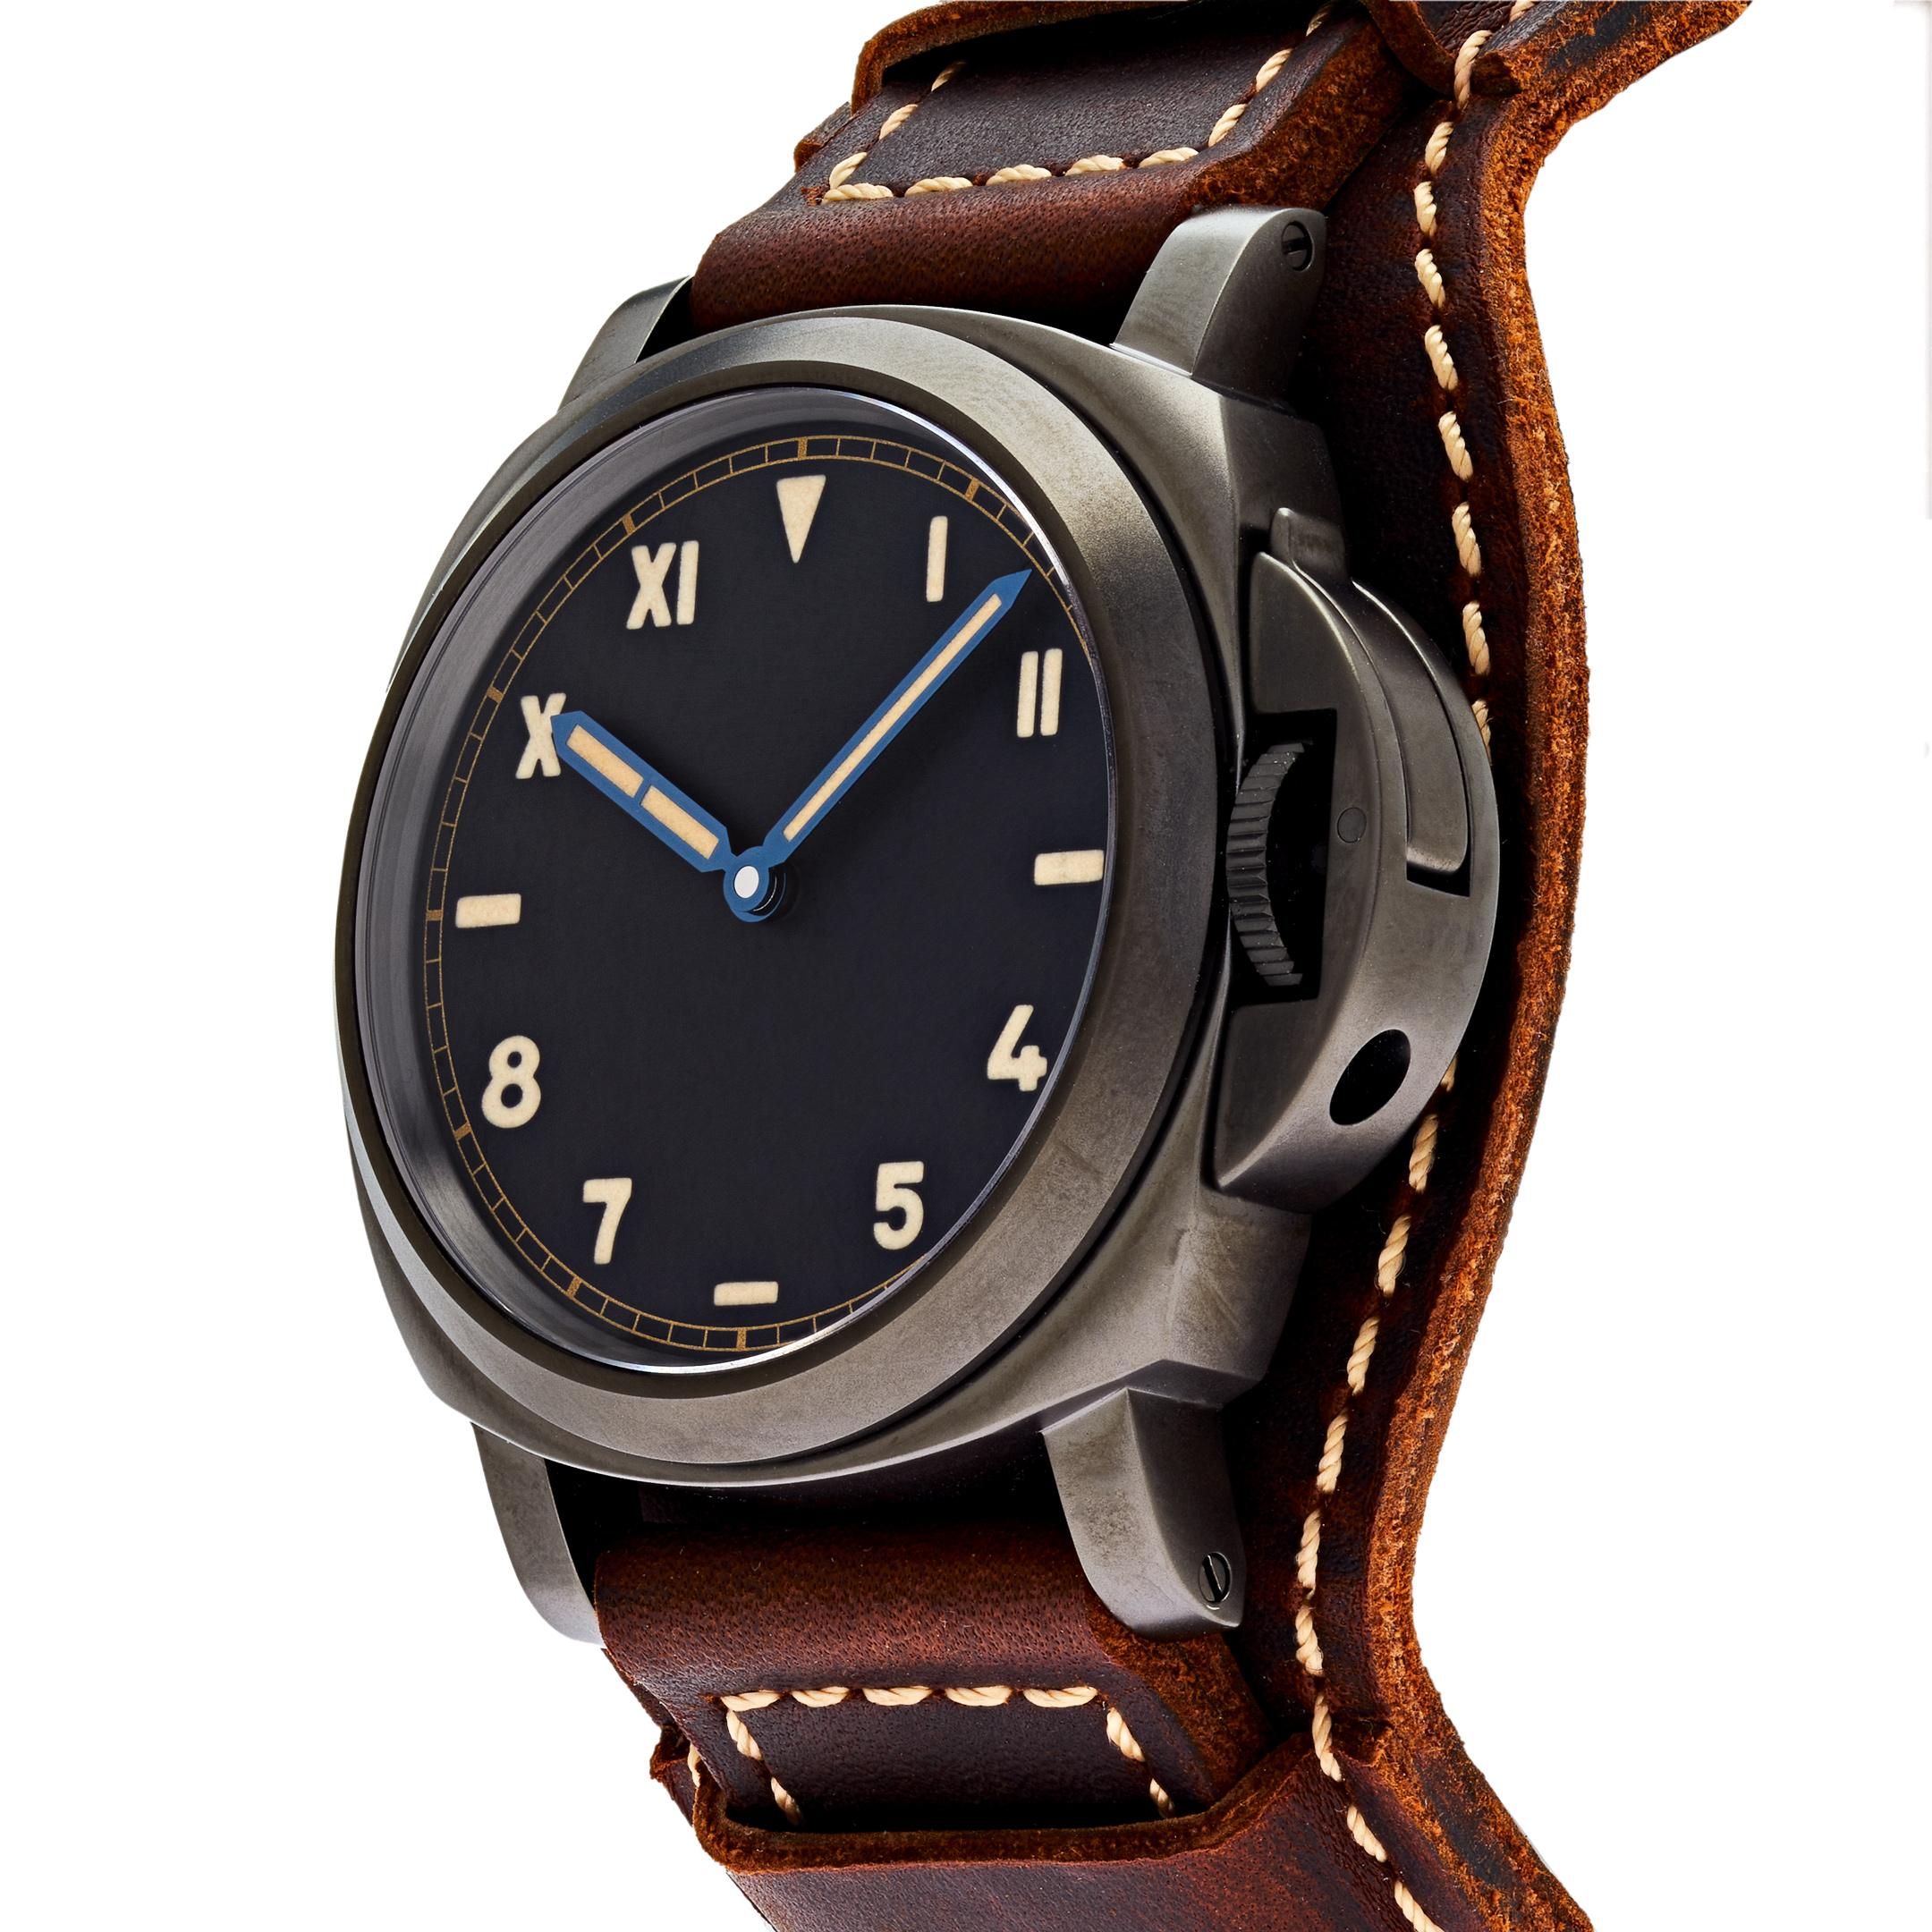 This Panerai Luminor California 8 Days is crafted in a titanium DLC case measuring 44mm. The black dial features luminous Arabic and Roman numerals and hour markers. The watch comes on a brown natural leather strap.

Reference Number	PAM00779